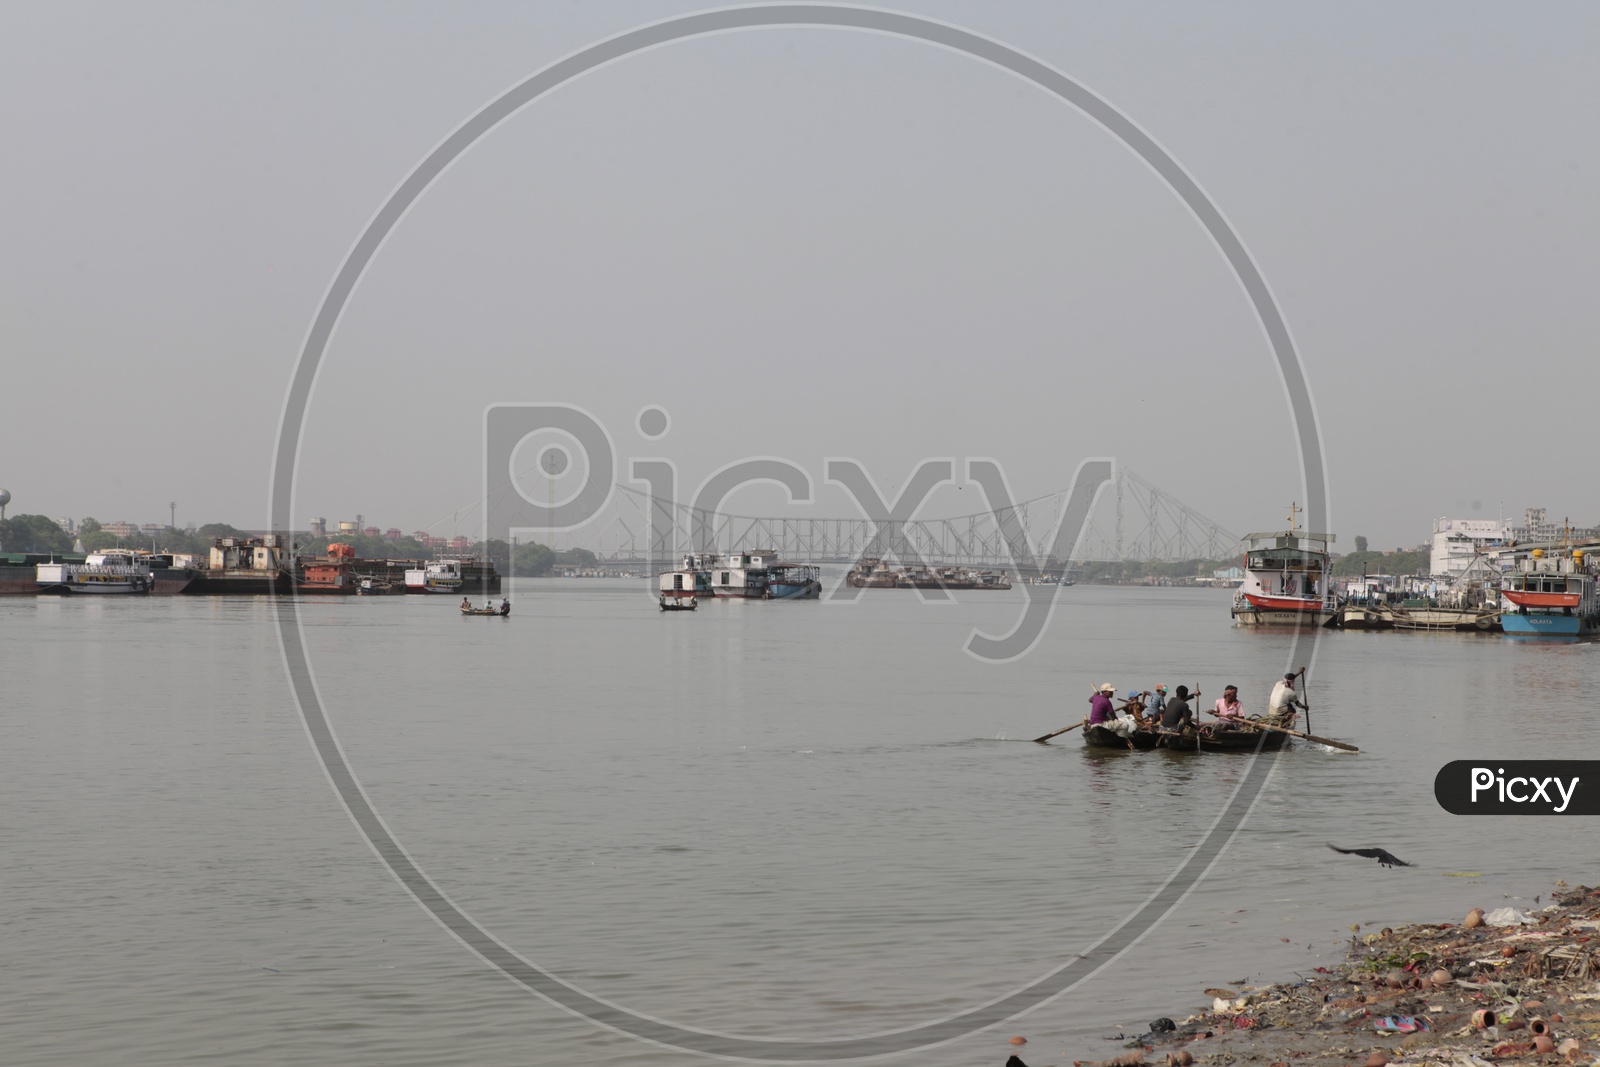 Local People sailing the boat in the Hooghly River